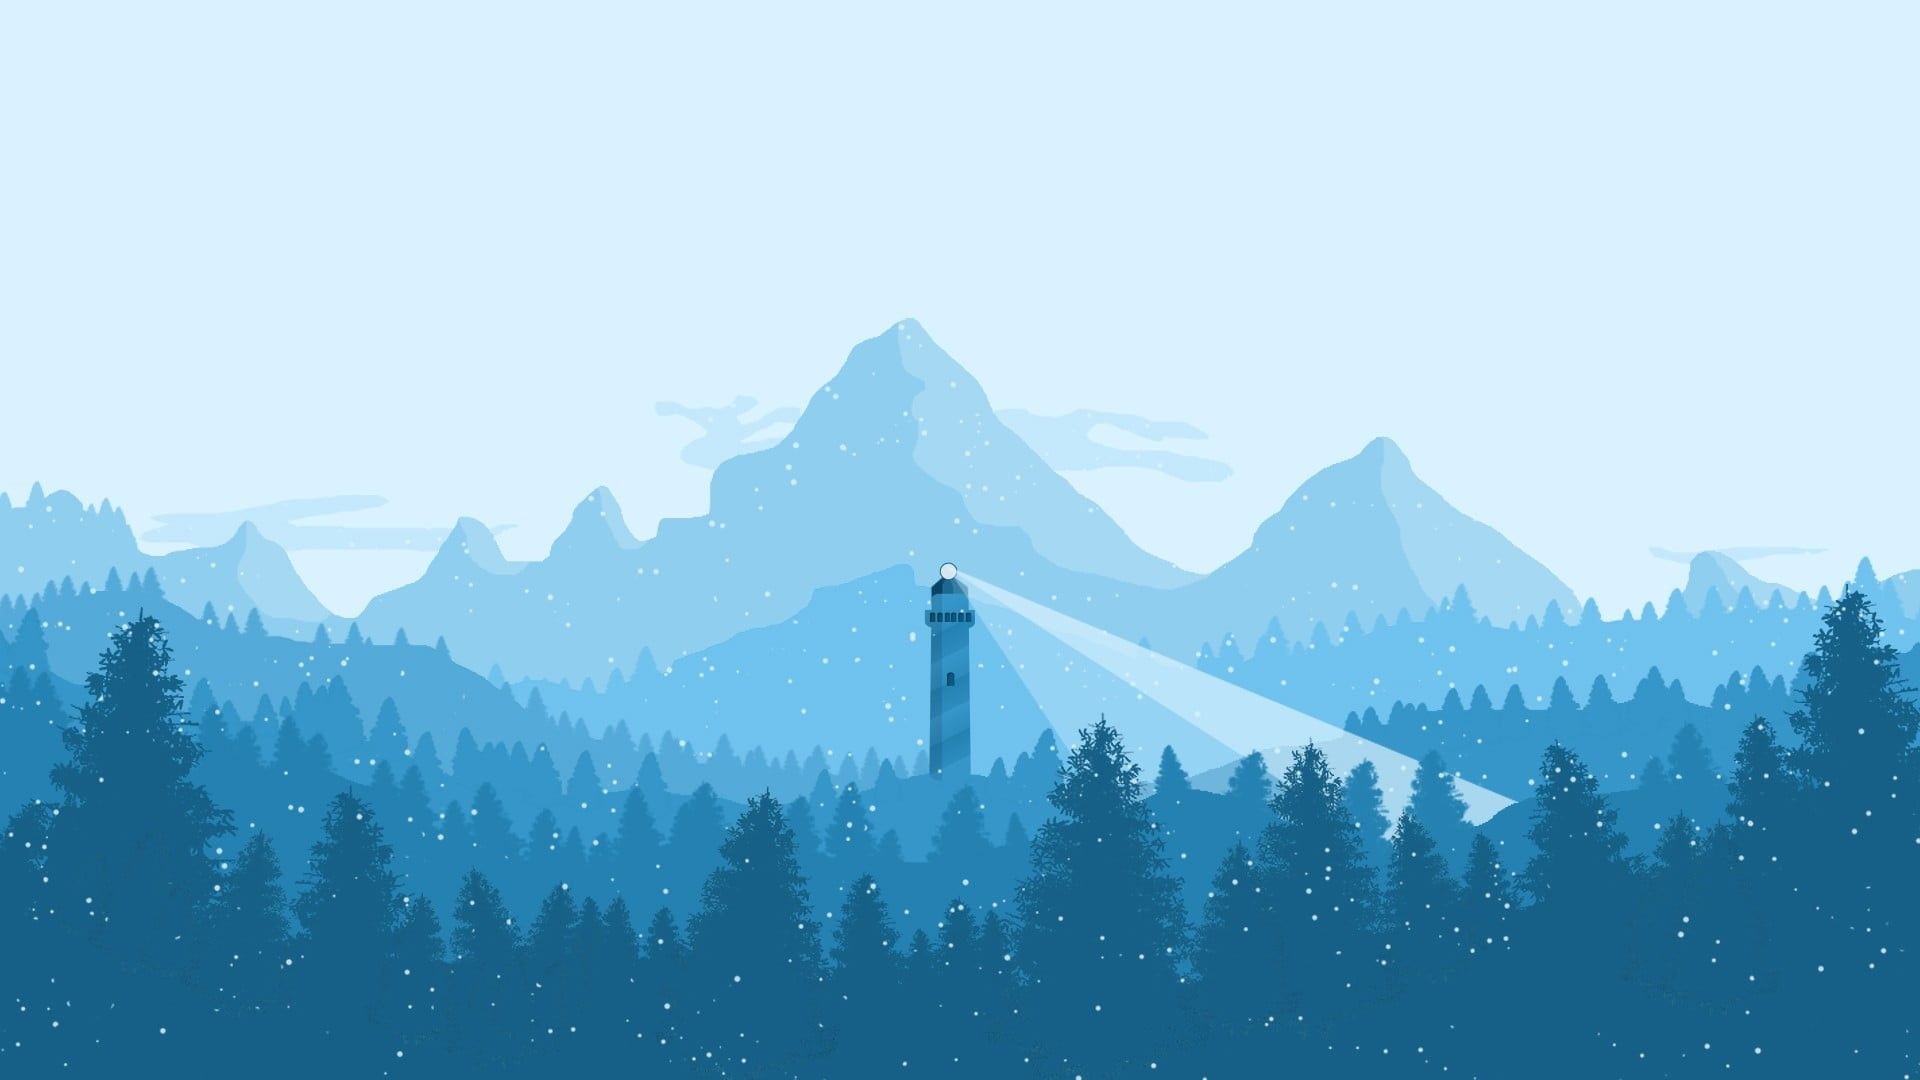 Wallpaper / snow, tranquil scene, mountains, mountain range, tranquility, winter, snowcapped mountain, lighthouse, nature, mountain, cyan, copy space, outdoors, illustration free download